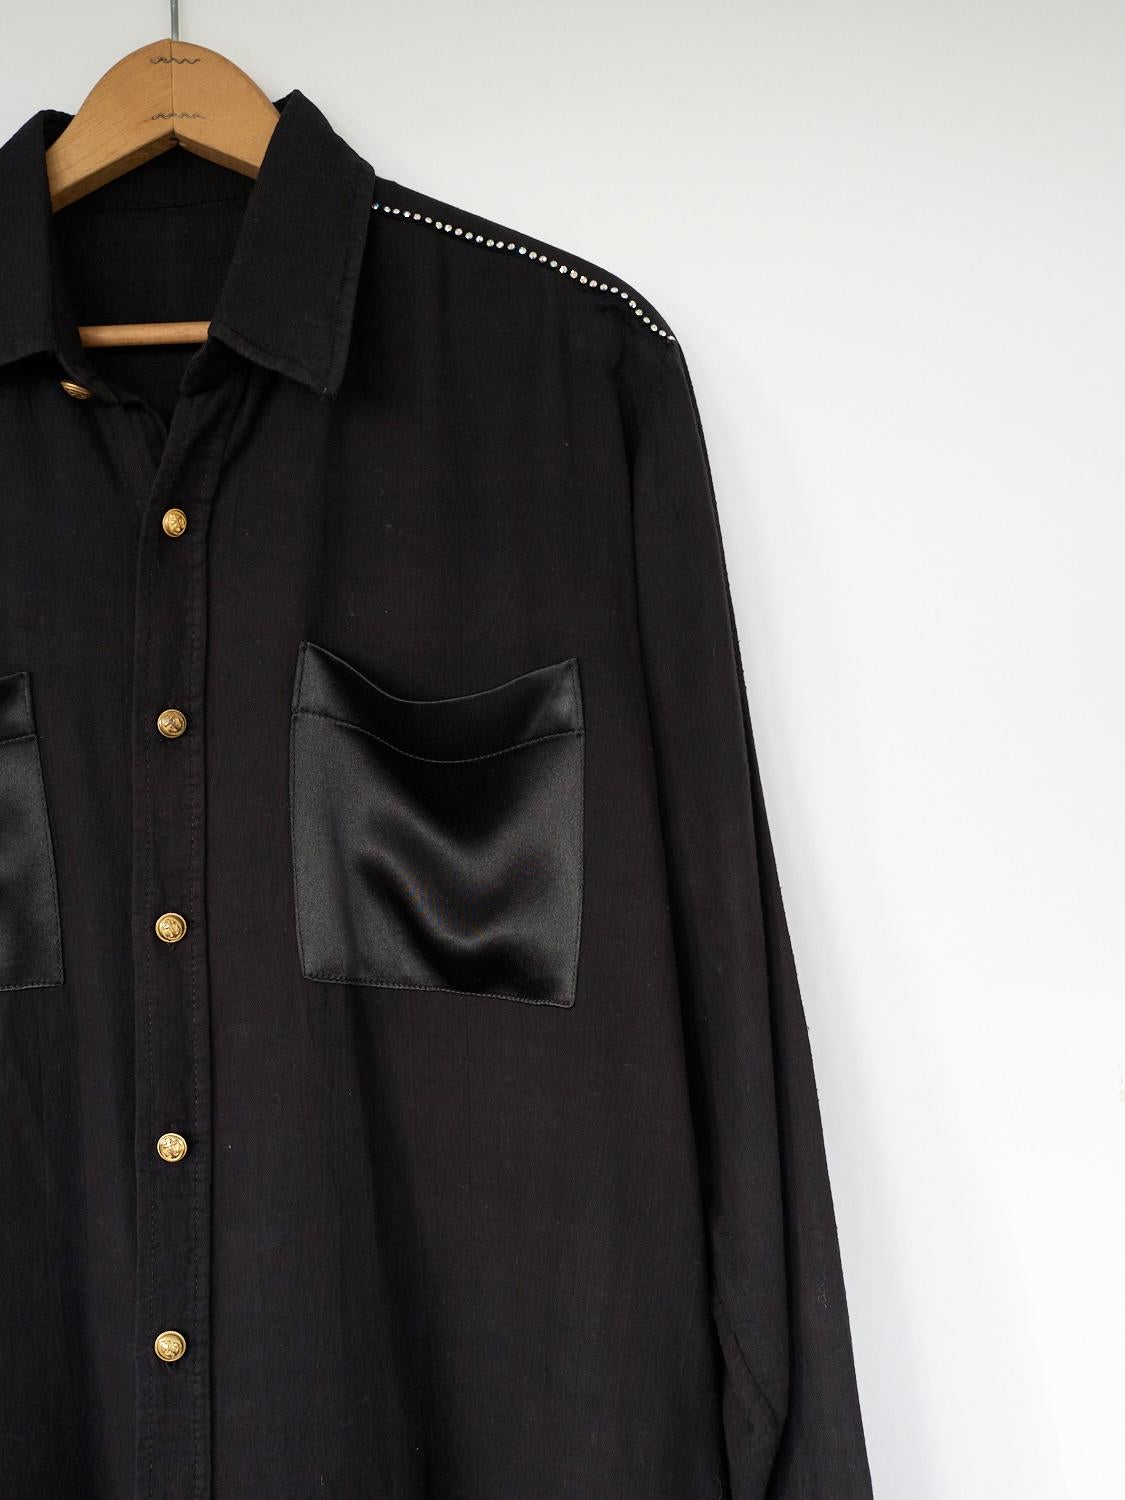 black shirt with gold buttons